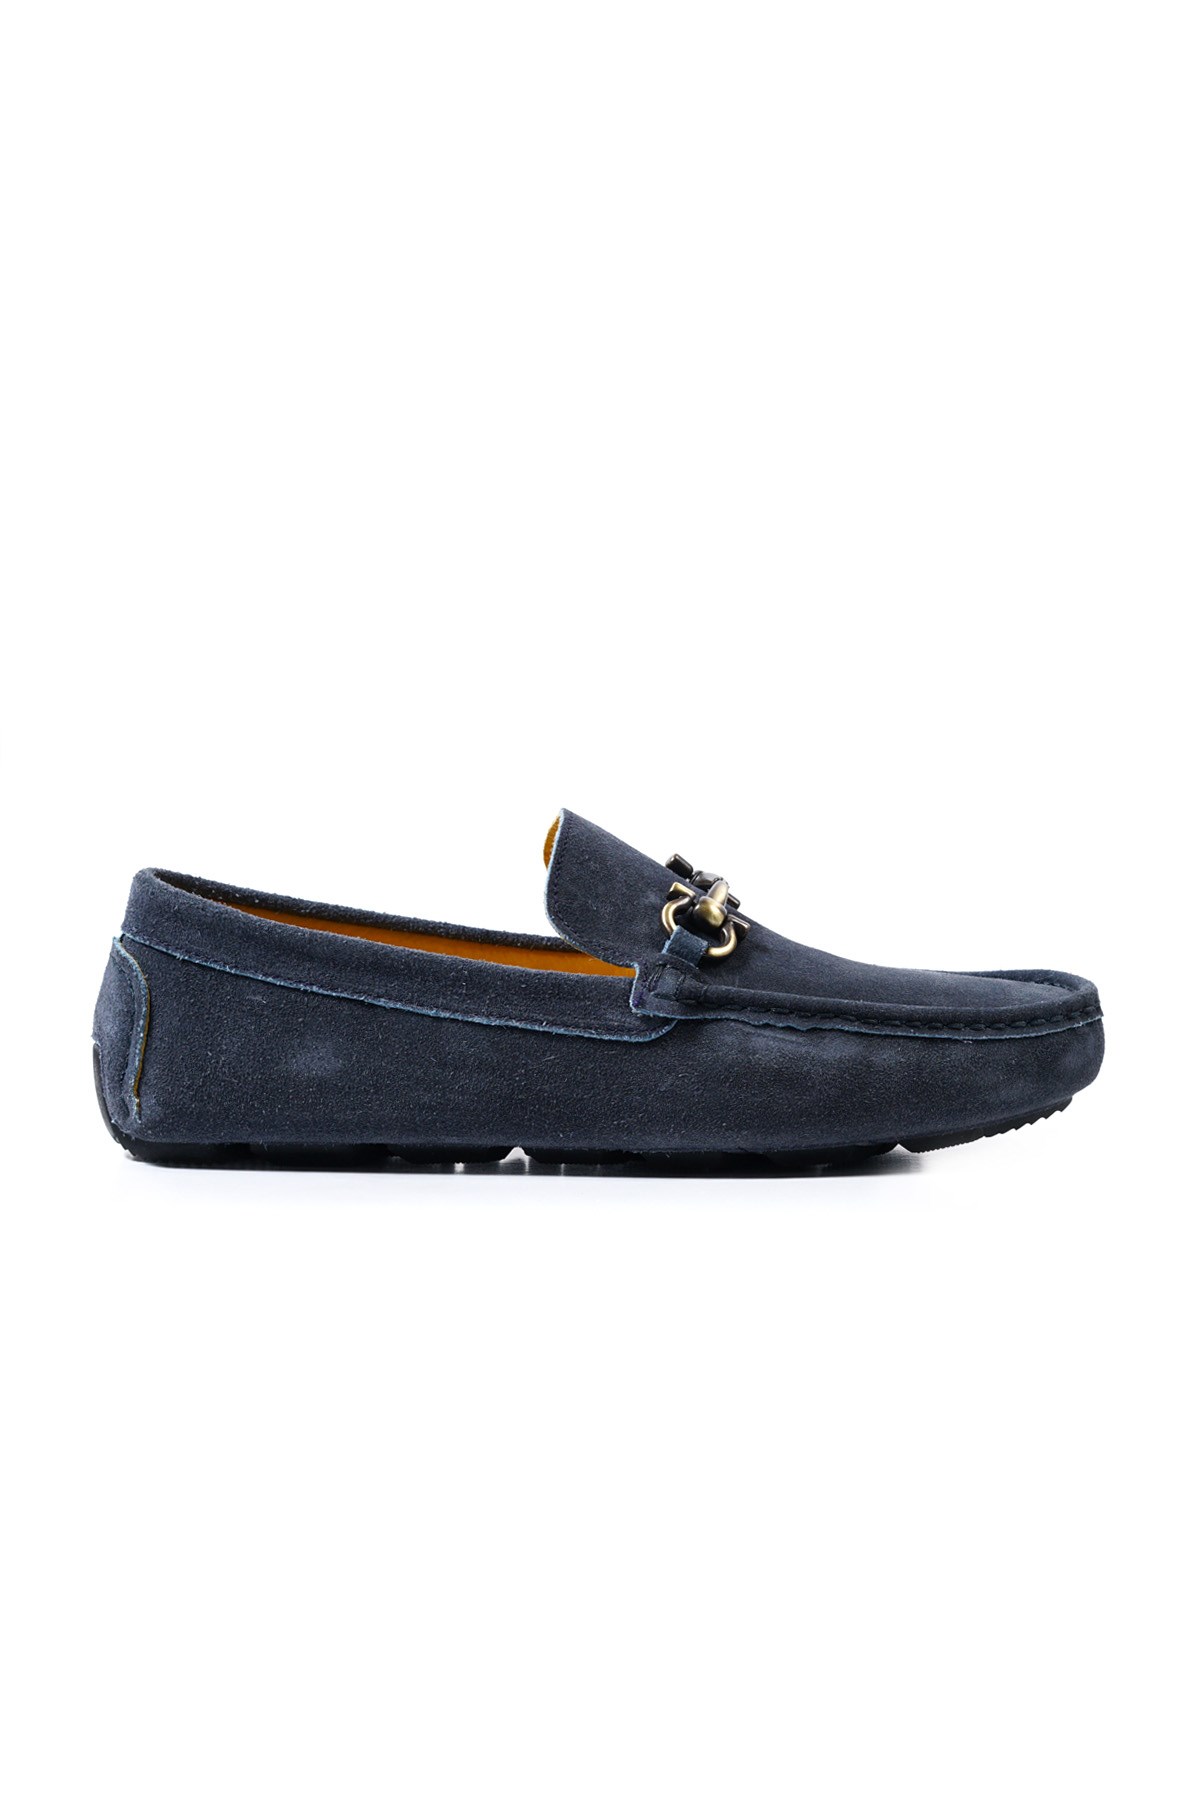 Ephesus (Special Edition Color) Navy Blue Genuine Suede Leather Men's Loafer Shoes